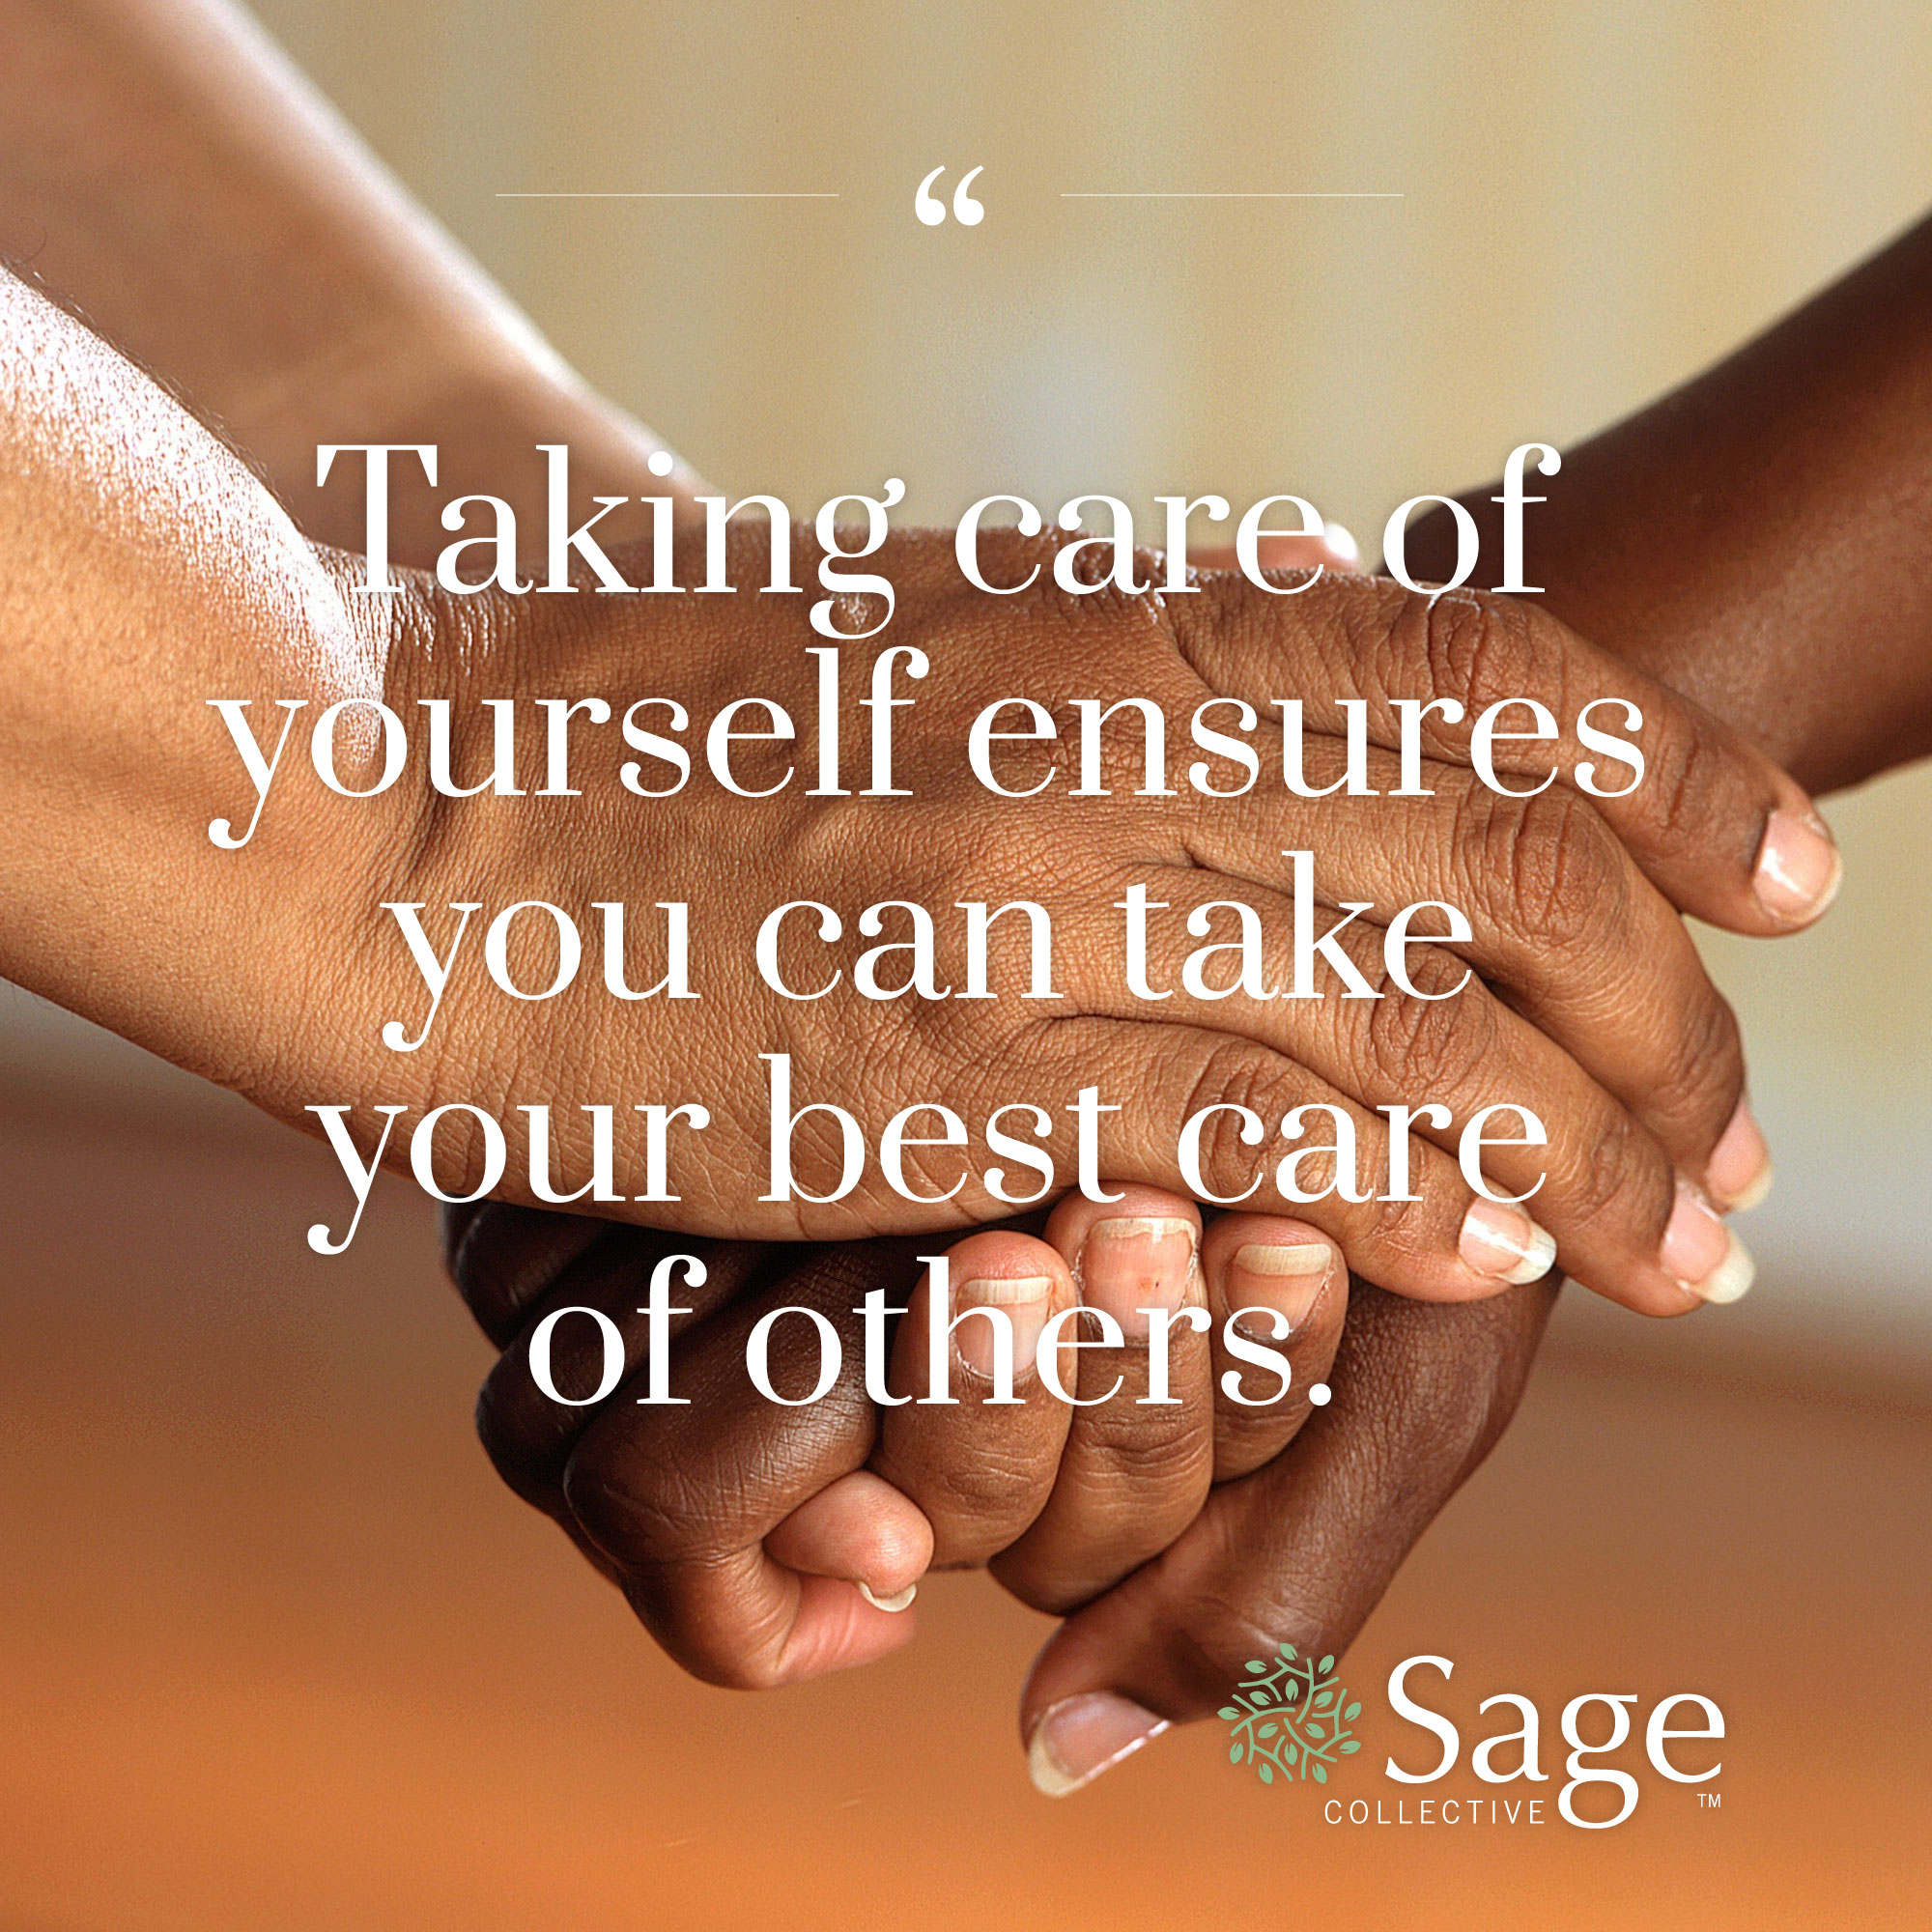 Image of one person's hands holding another's, with text on top that reads Taking care of yourself ensures you can take your best care of others